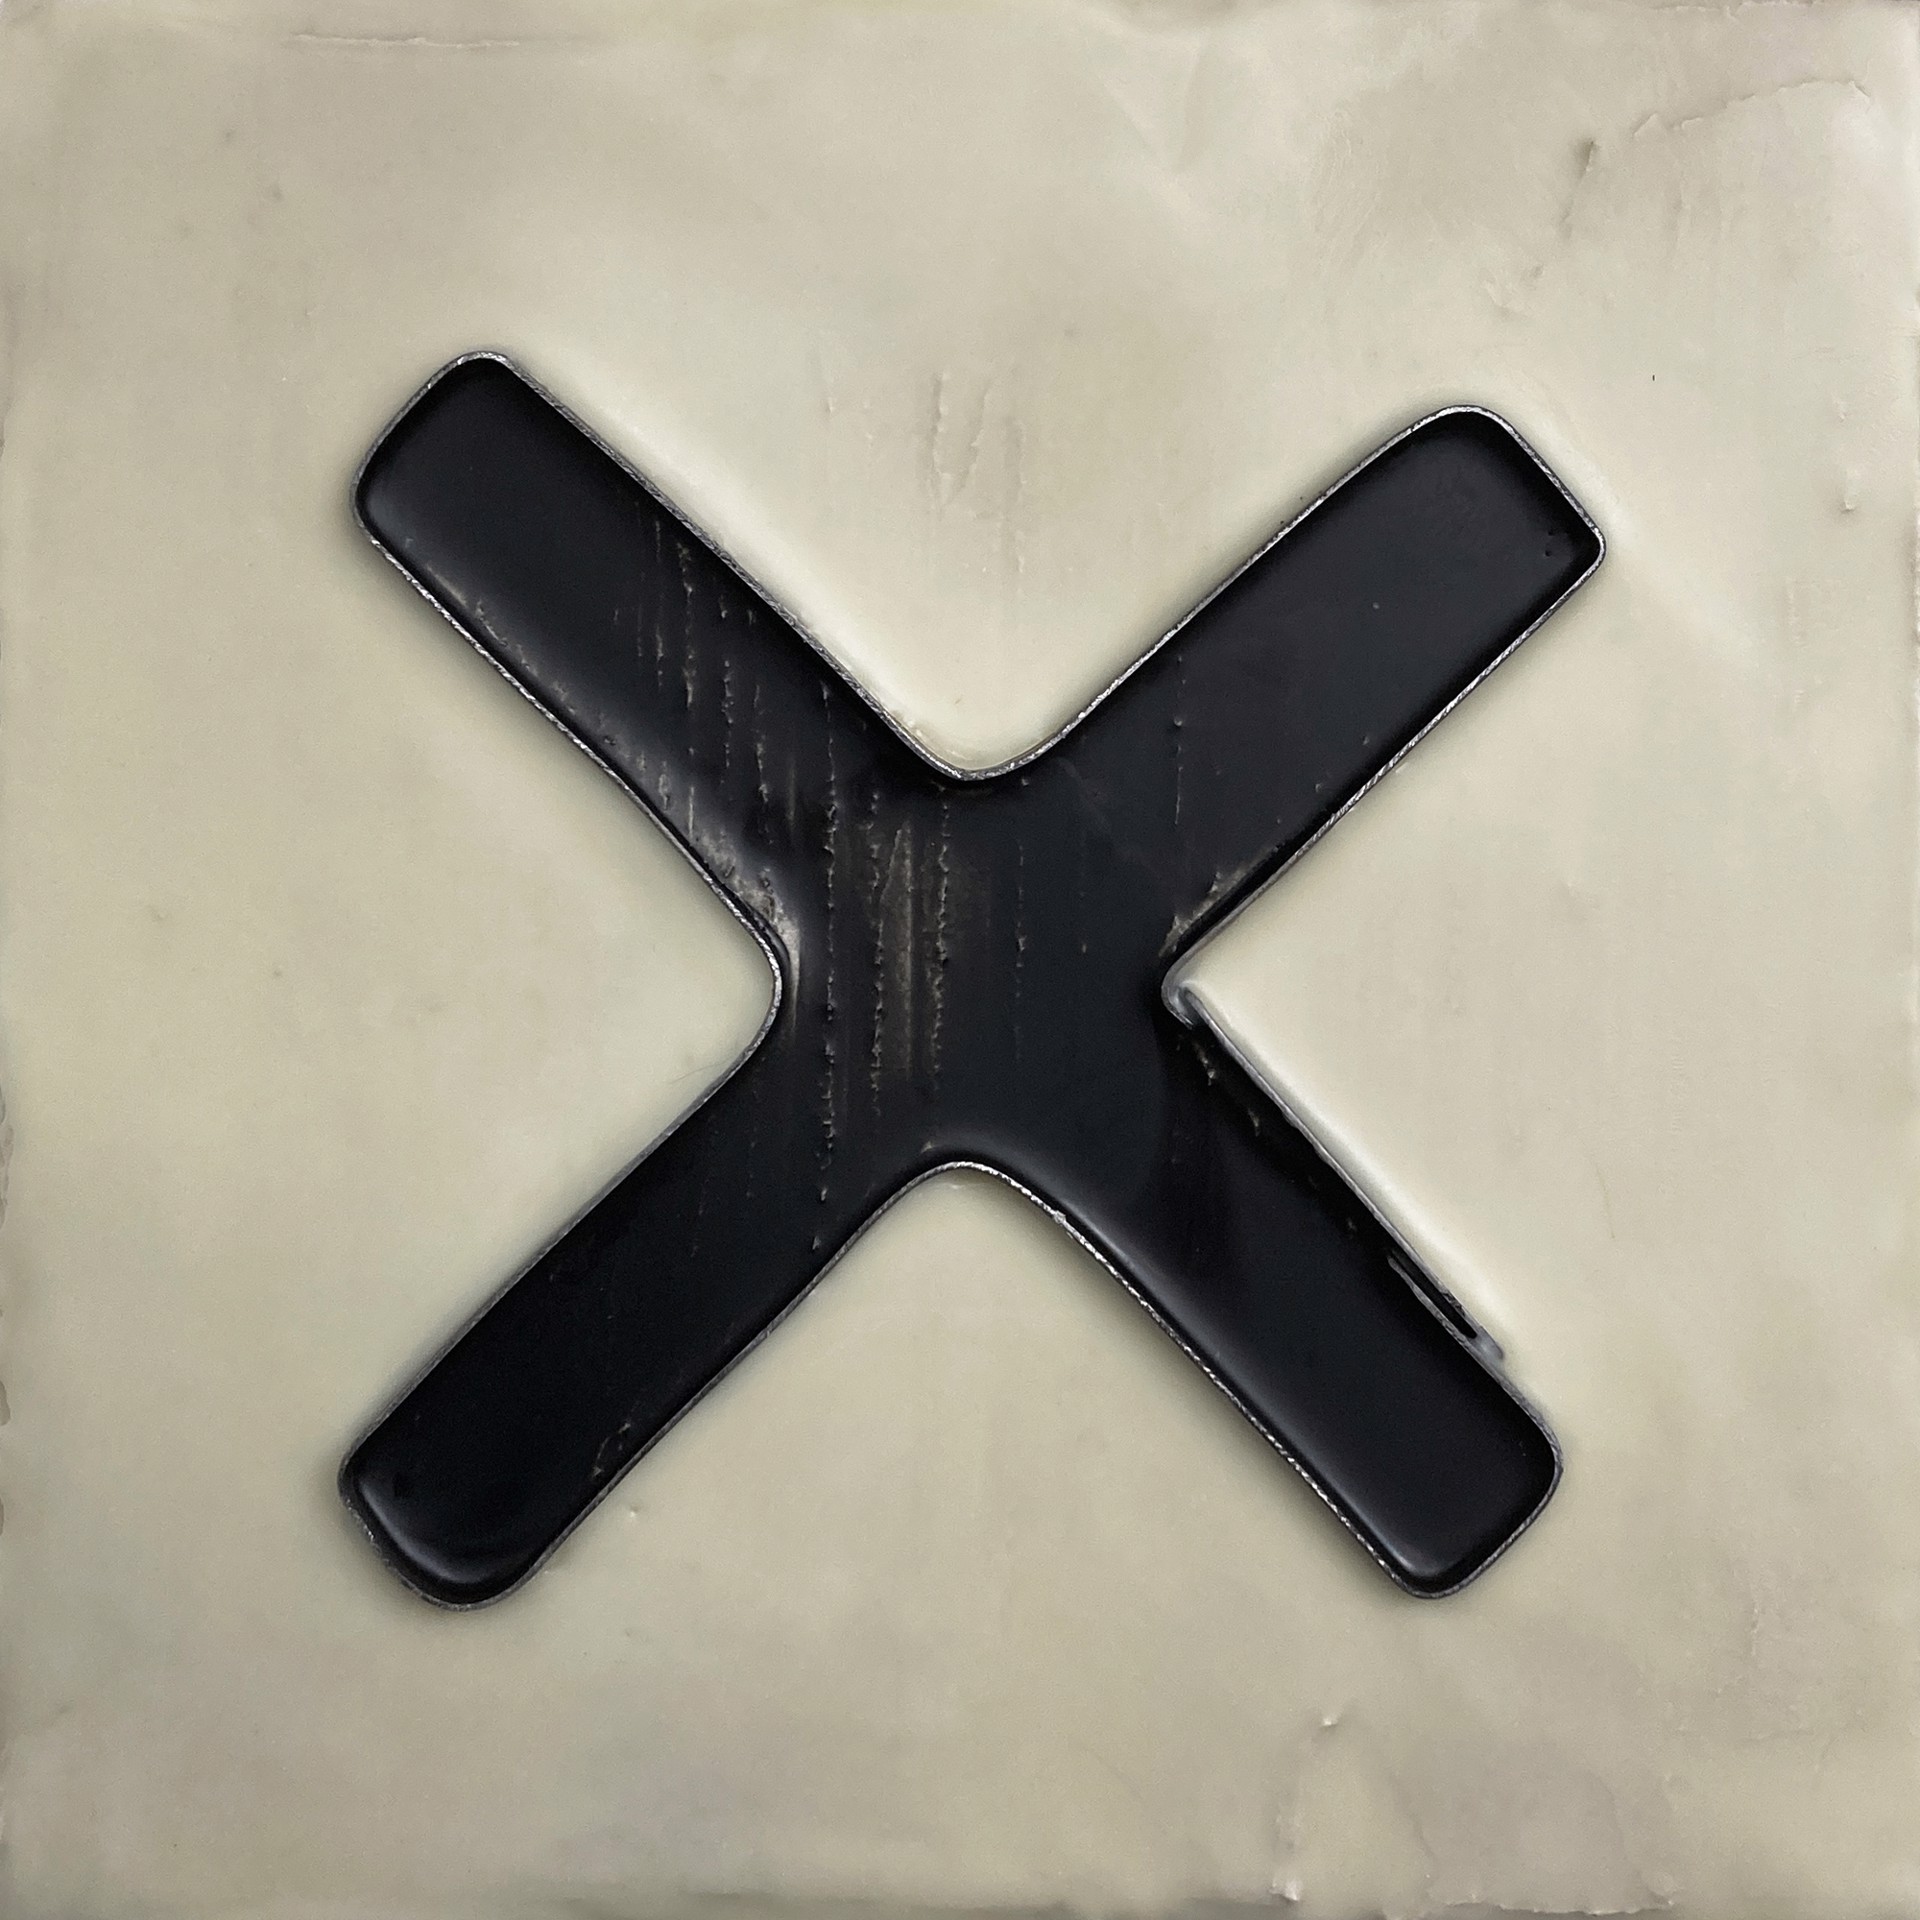 It's Always The X's 6 by Scott Connelly